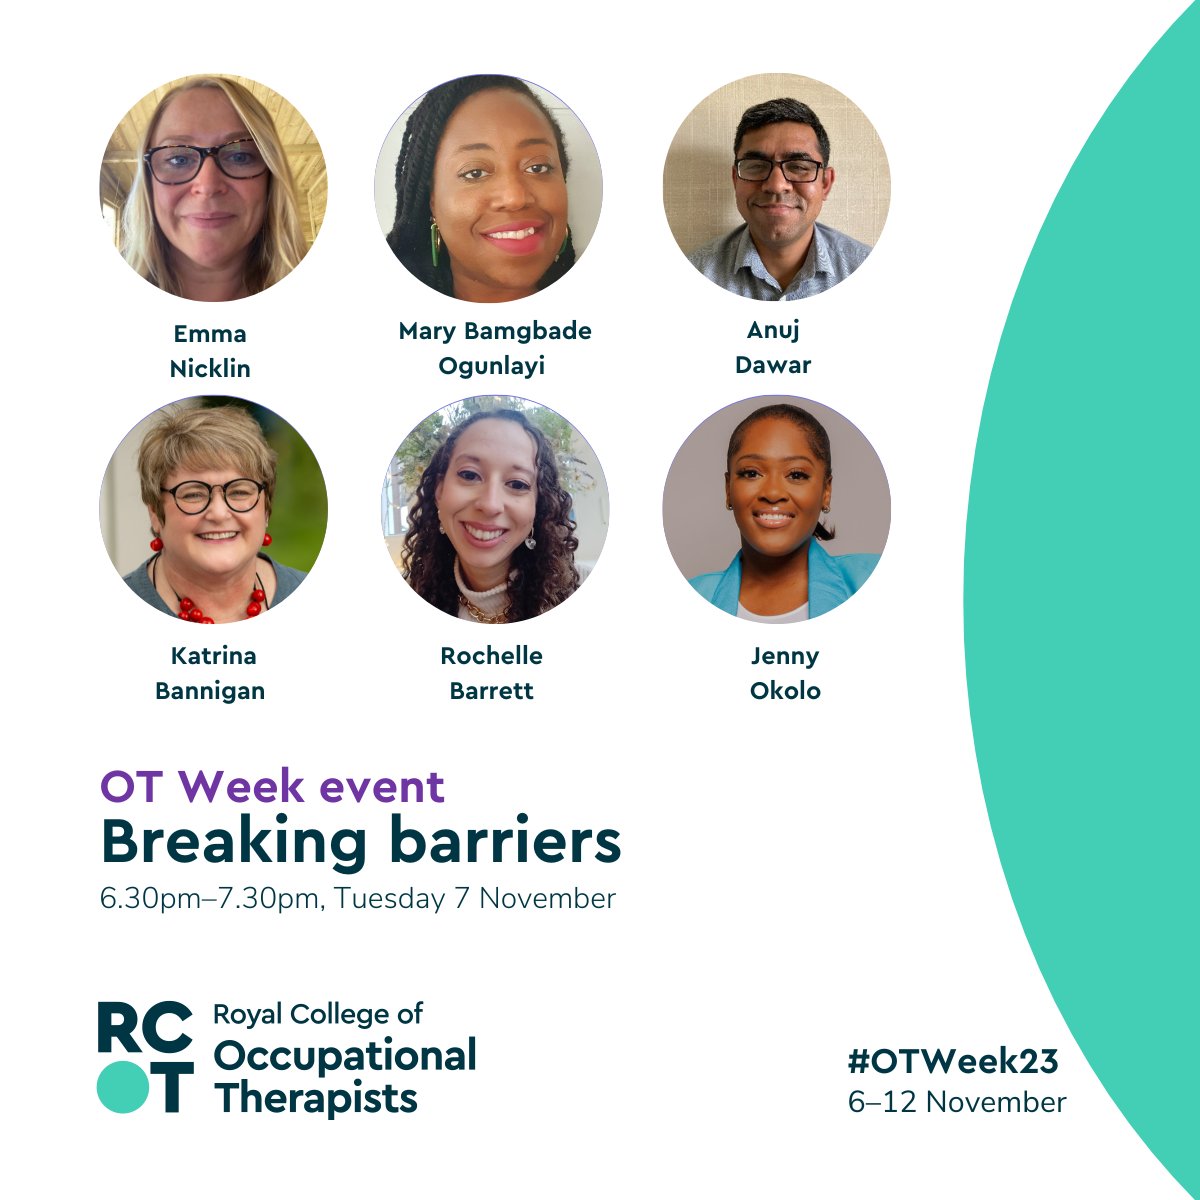 ⏰ It's not too late to sign up for the #OTWeek23 Breaking Barriers event this evening (Tuesday 7 November) by midday: loom.ly/8ZMhYdU Hear from our panel of OTs about how they've overcome barriers to discussing occupations, in the context of occupational therapy.